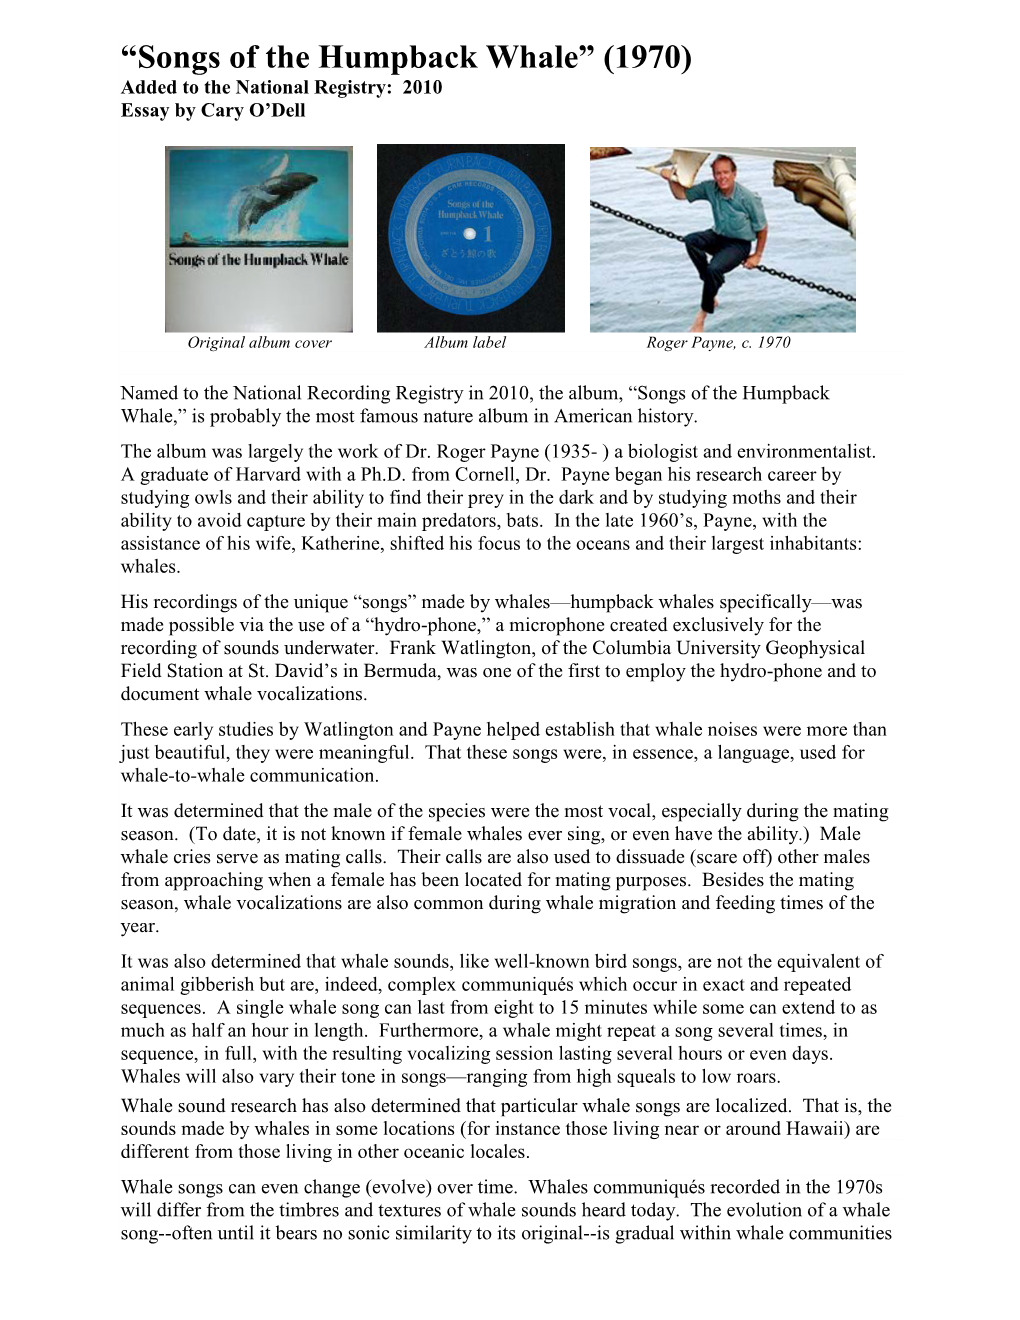 Songs of the Humpback Whale” (1970) Added to the National Registry: 2010 Essay by Cary O’Dell